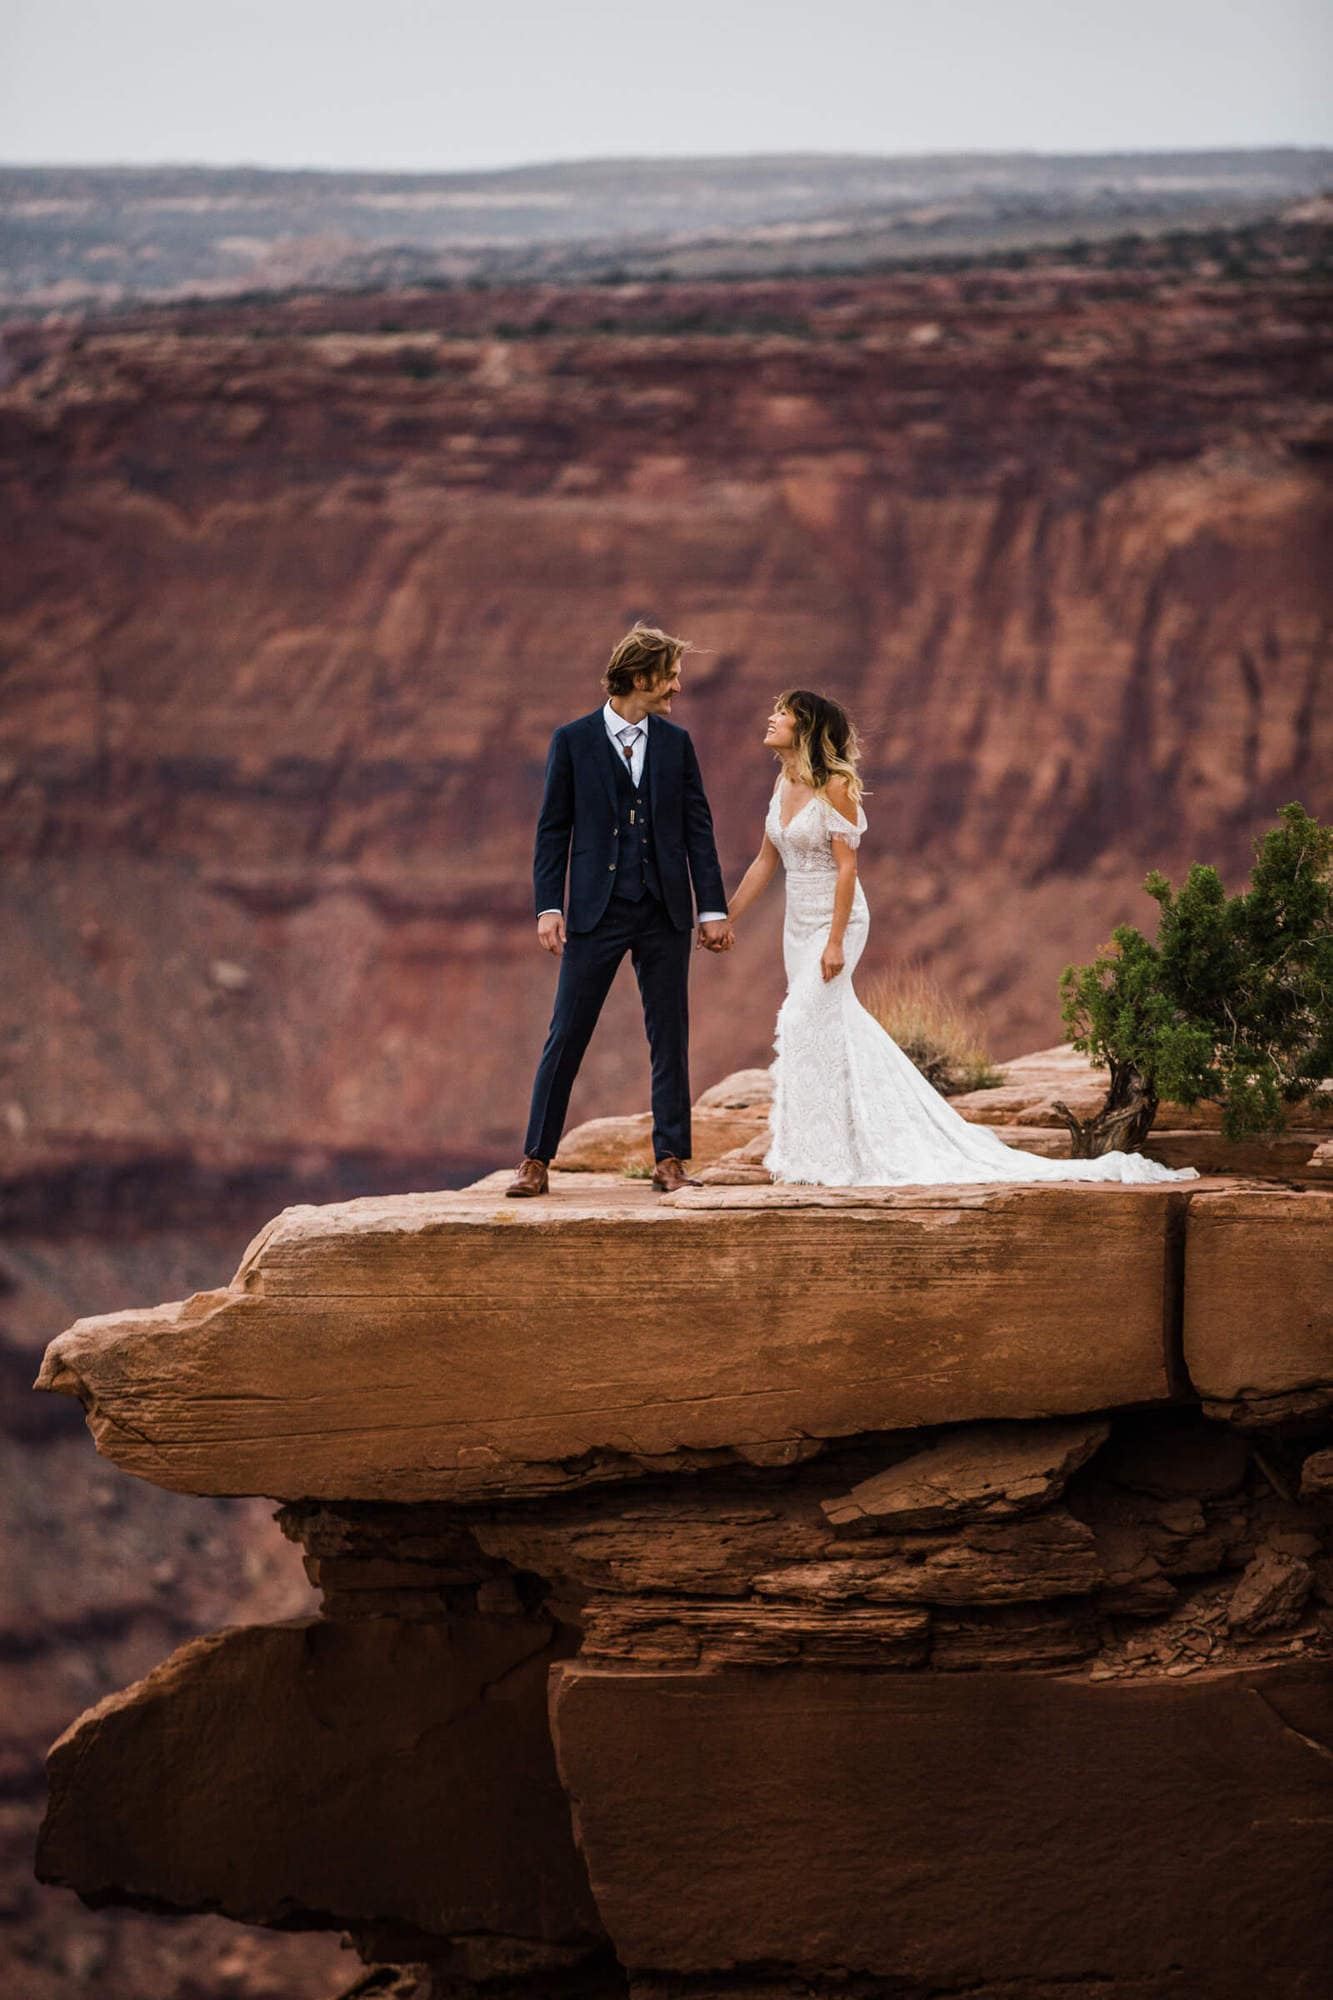 A wedding of off-road locations, campsite celebrations, and rock climbing adventures, this adventure wedding in Moab is one for the ages.